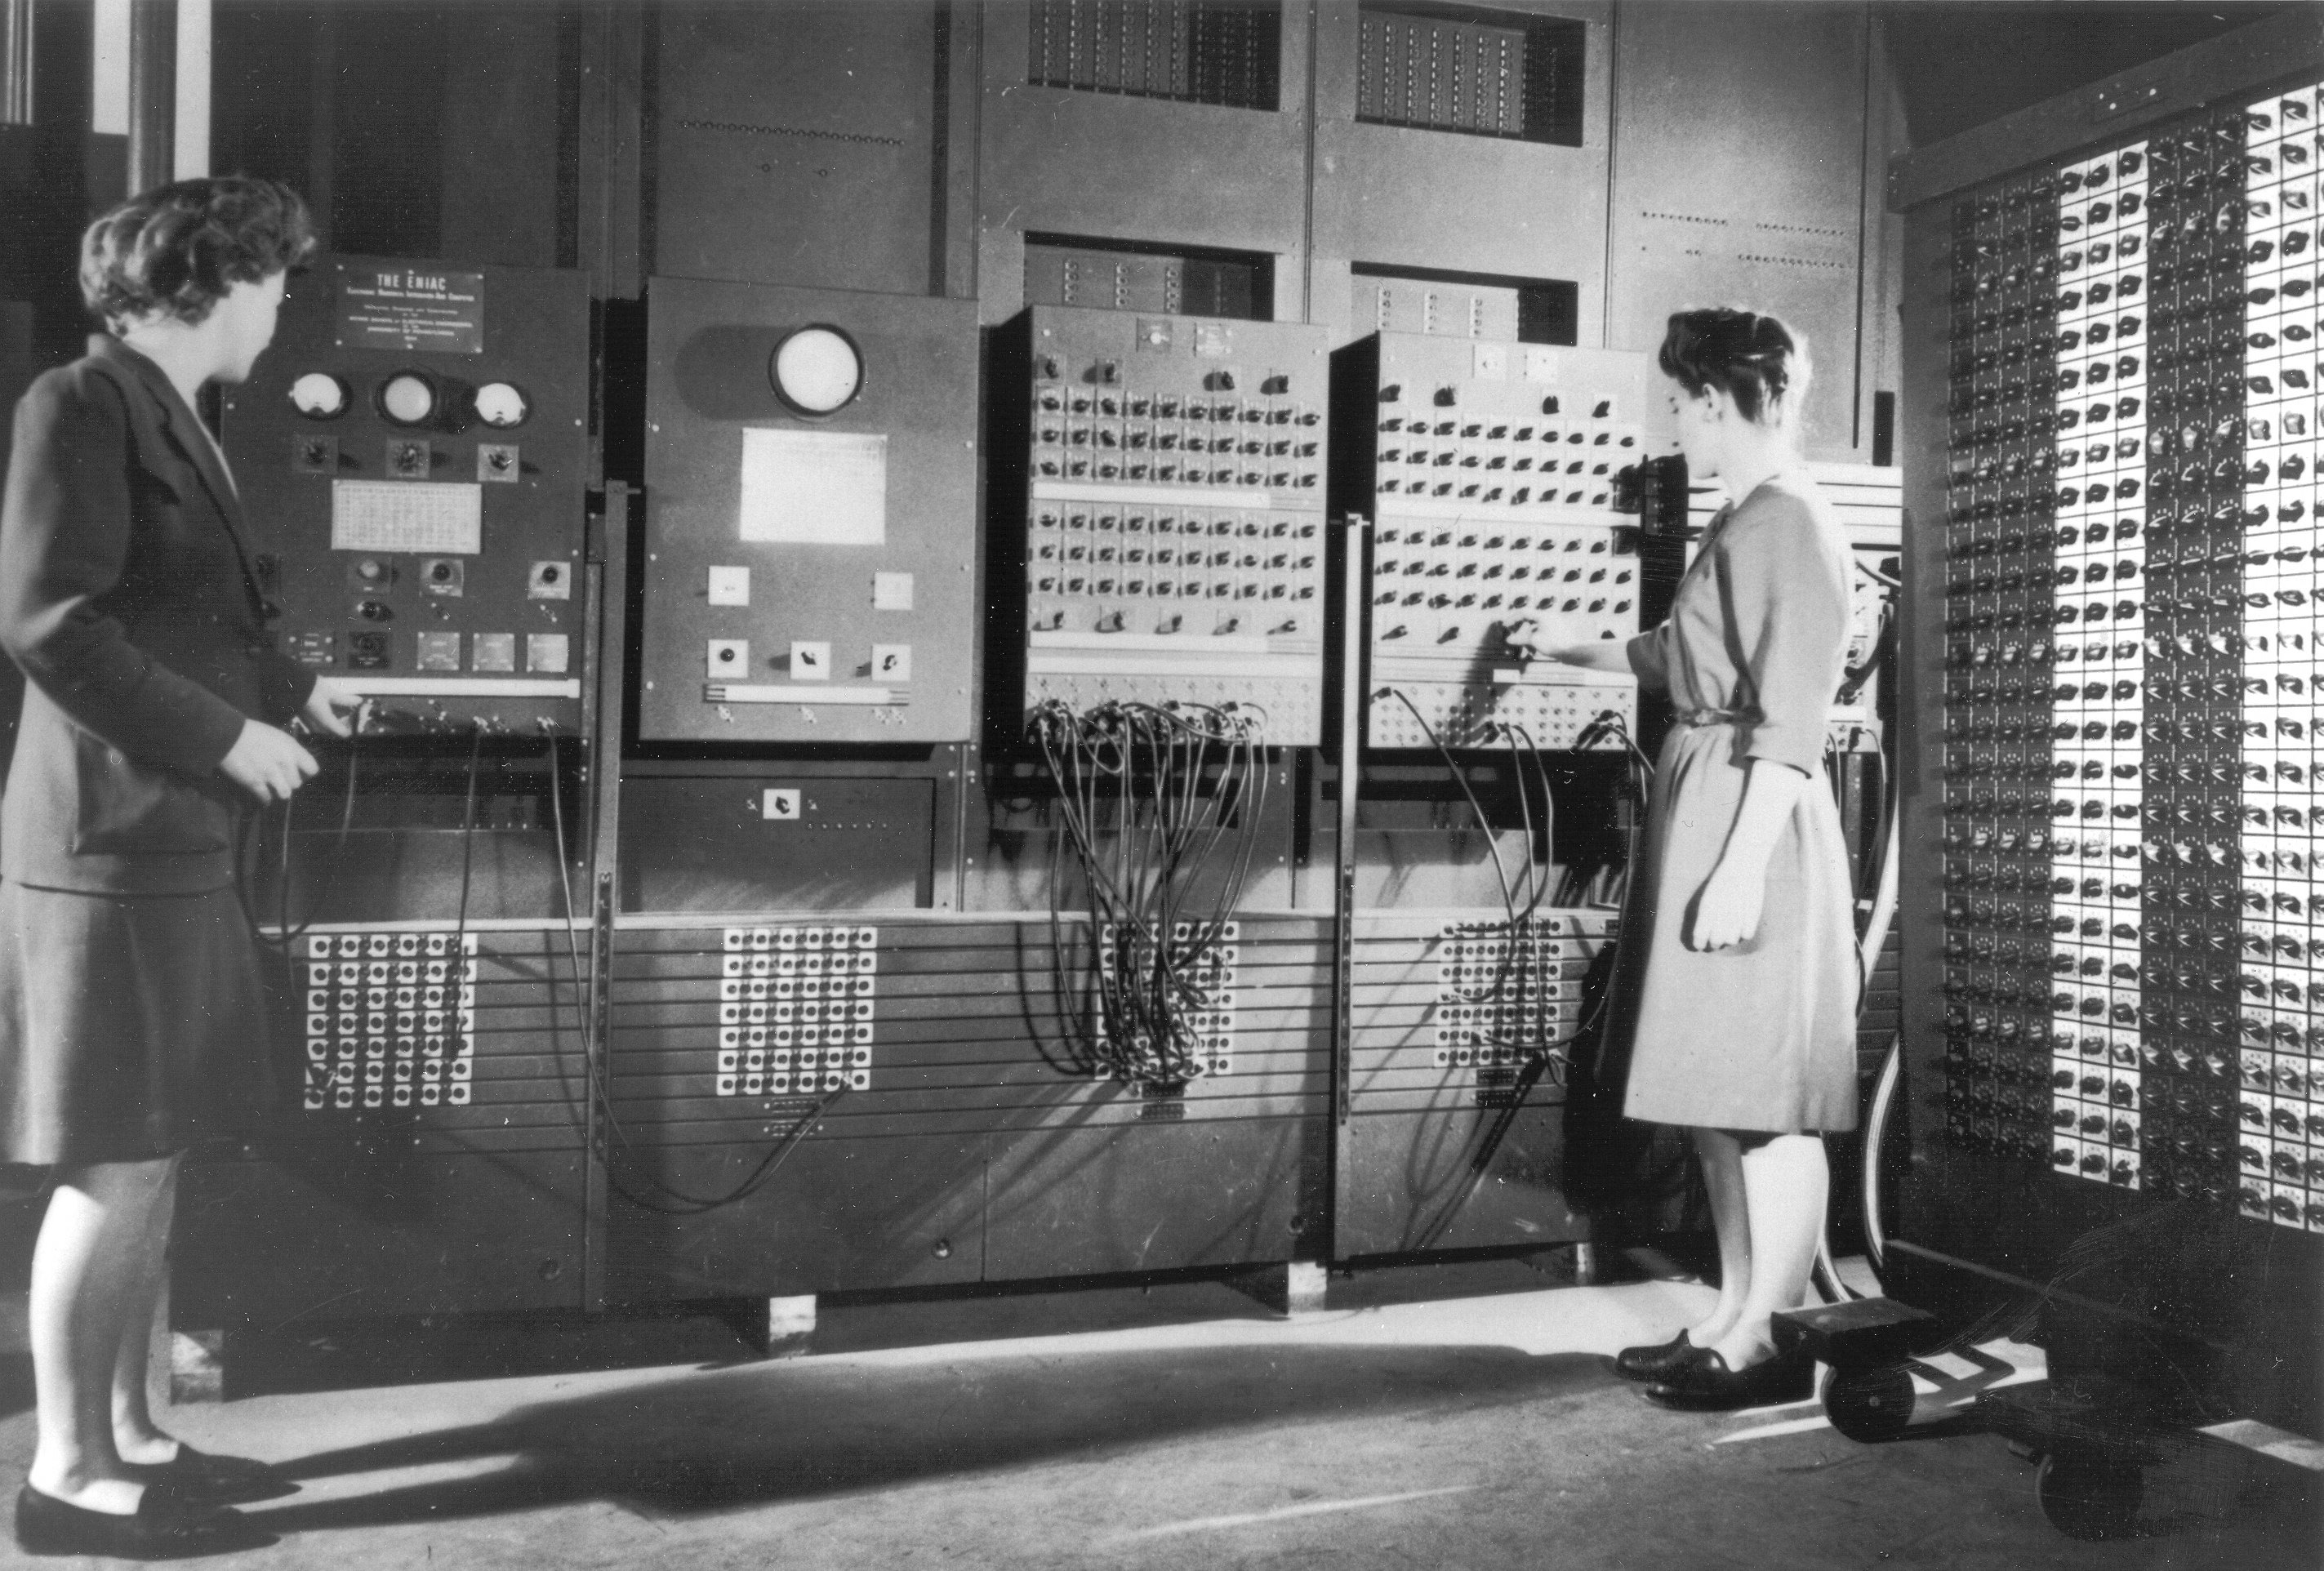 Programmers Betty Jean Jennings (left) and Fran Bilas (right) operate the main control panel of ENIAC